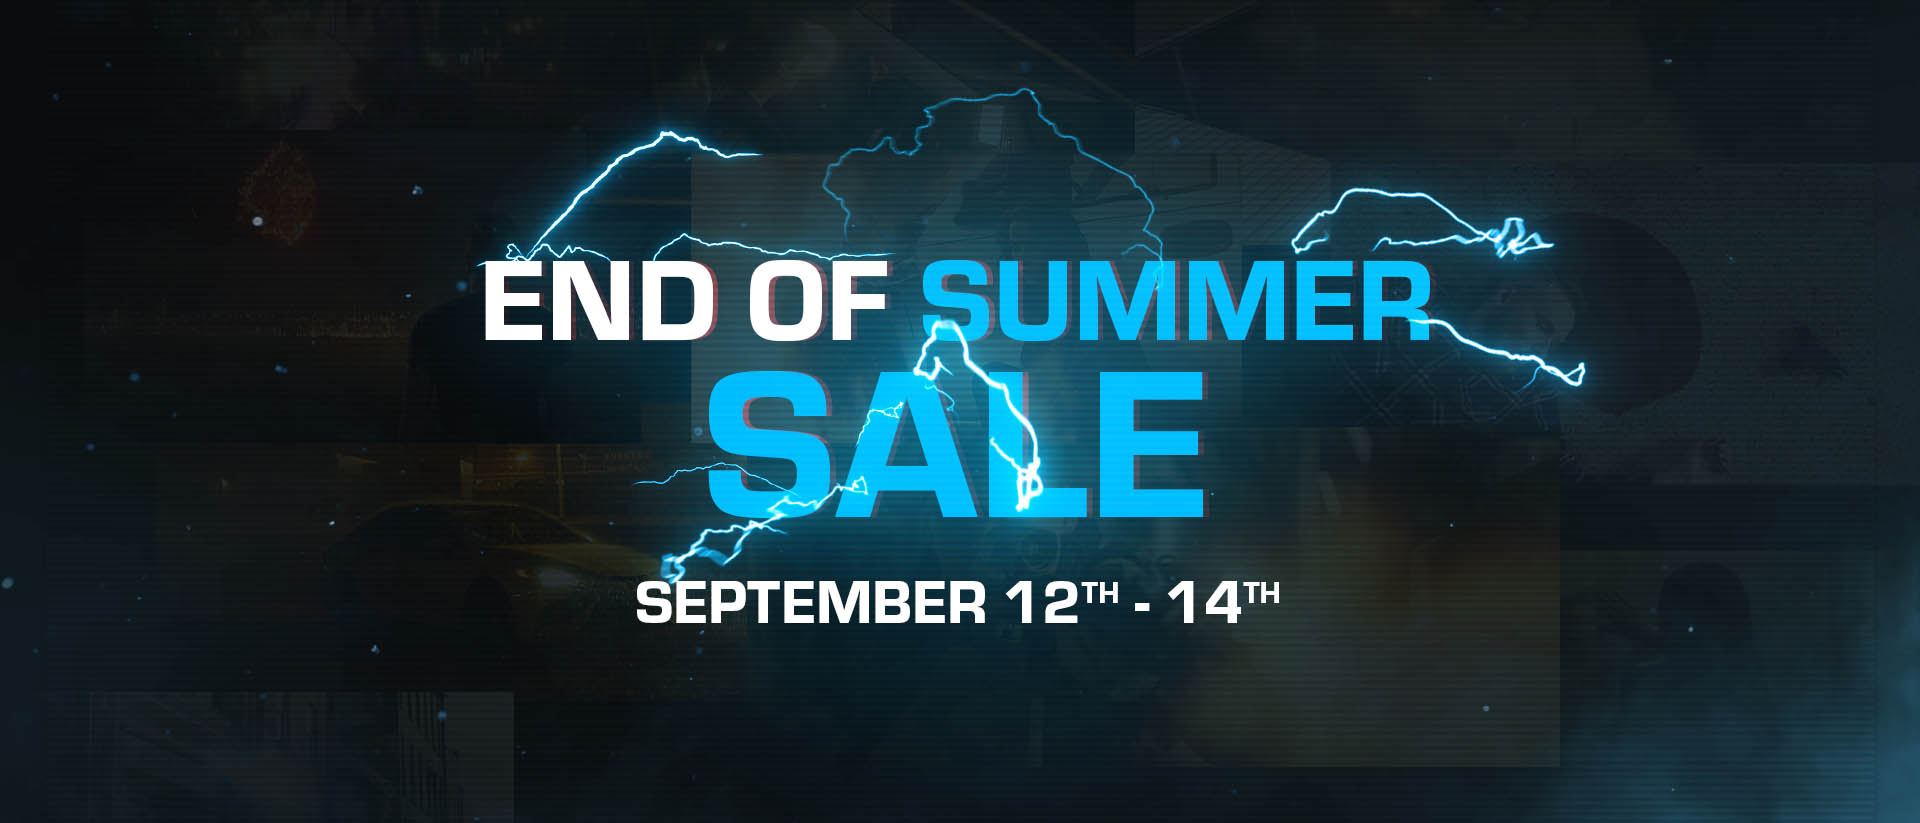 End of Summer Sale 2022 Sale Announcement | 25% Off Sitewide